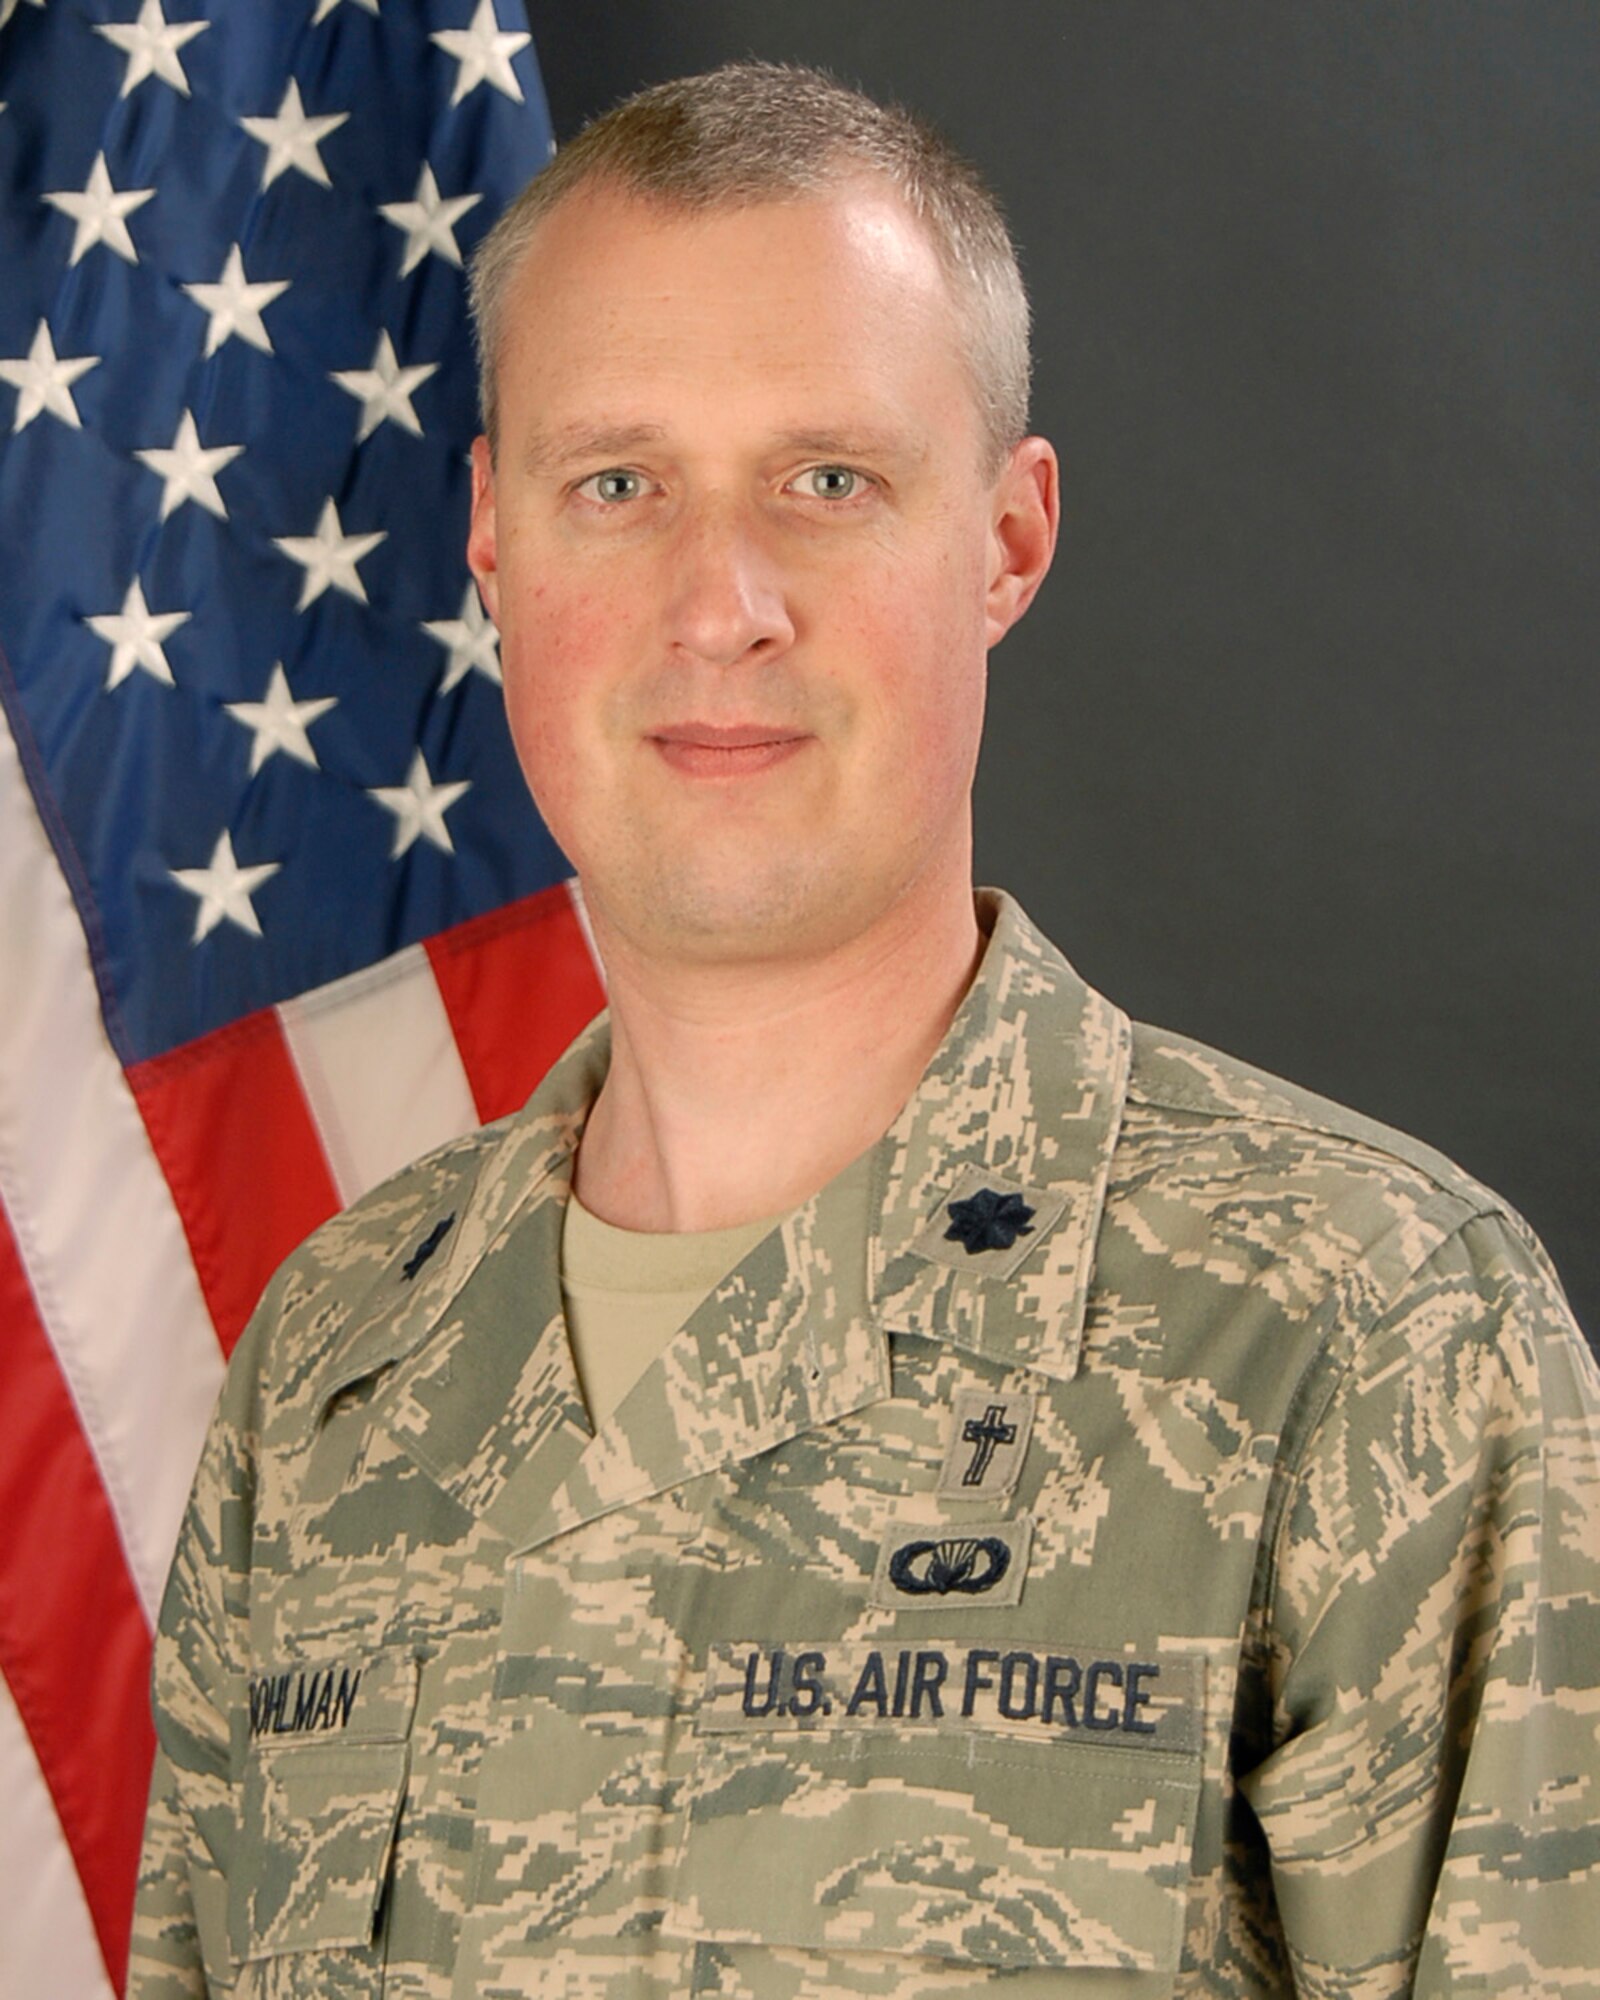 Lt. Col. Brian Bohlman, 169th Fighter Wing Chaplain at McEntire JNGB, S.C., poses for his portrait on February 1, 2012.
(National Guard photo by Tech. Sgt. Caycee Watson/Released)